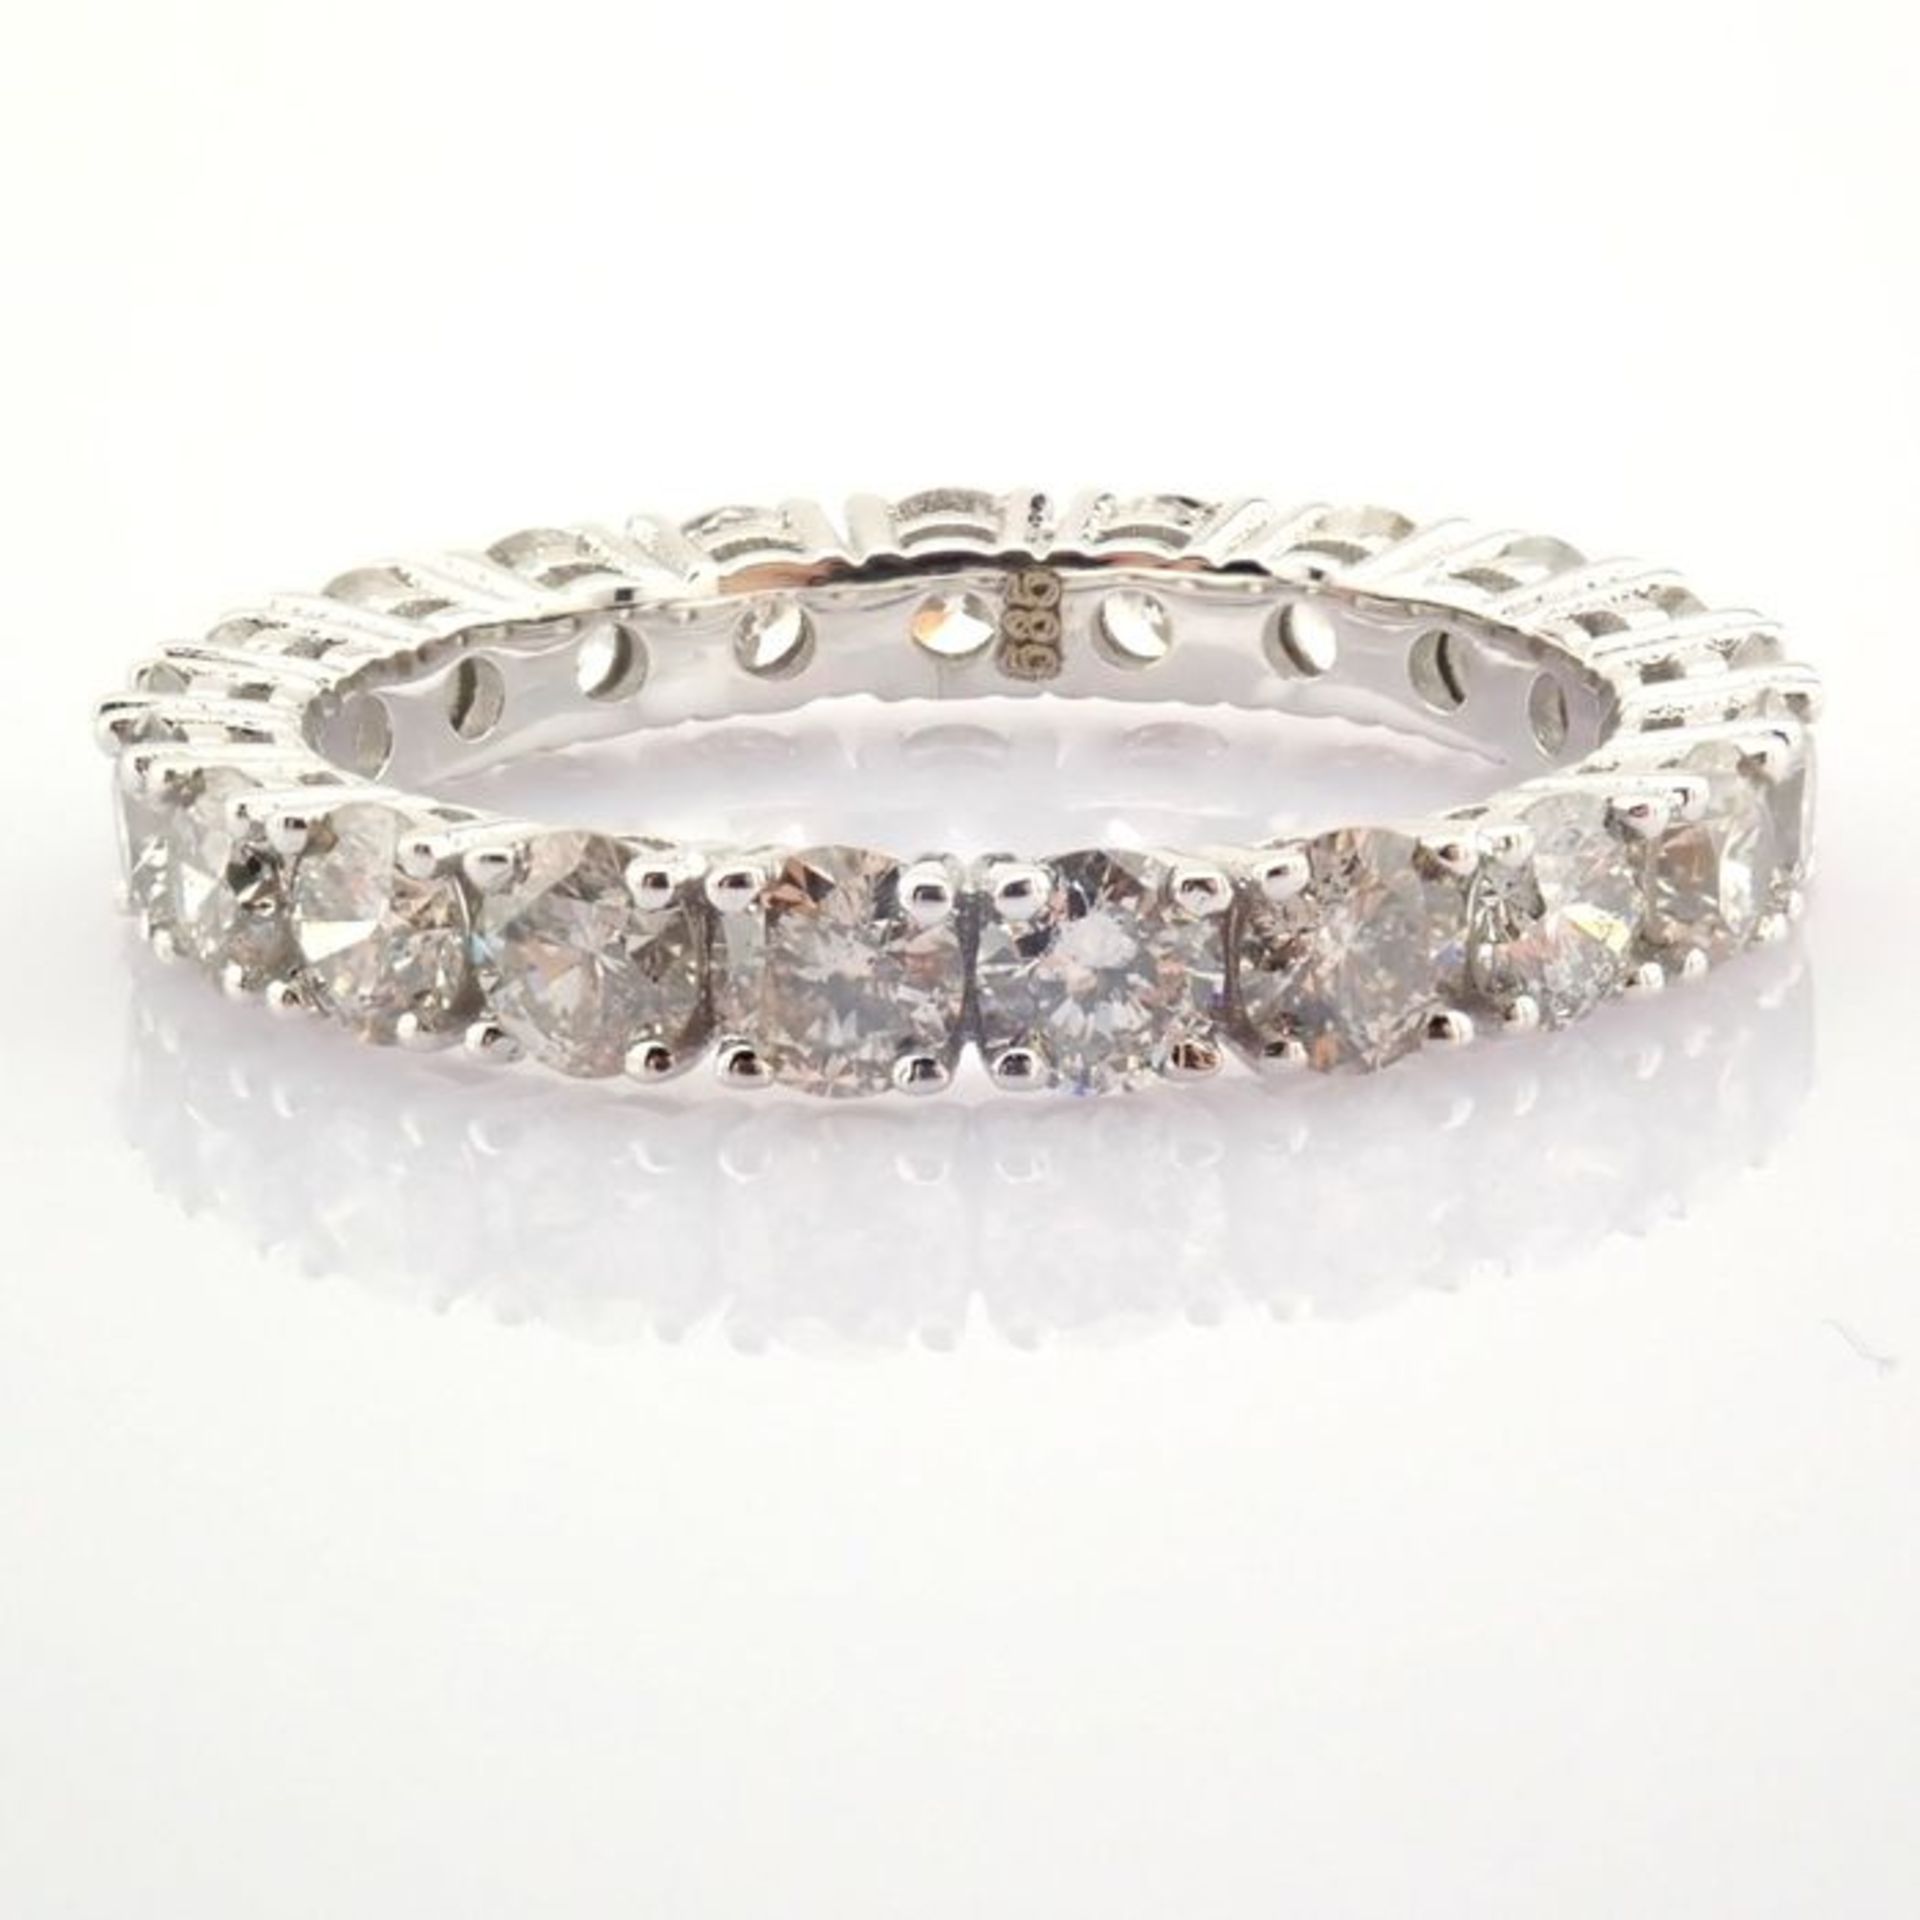 Certificated 14K White Gold Diamond Ring - Image 9 of 10